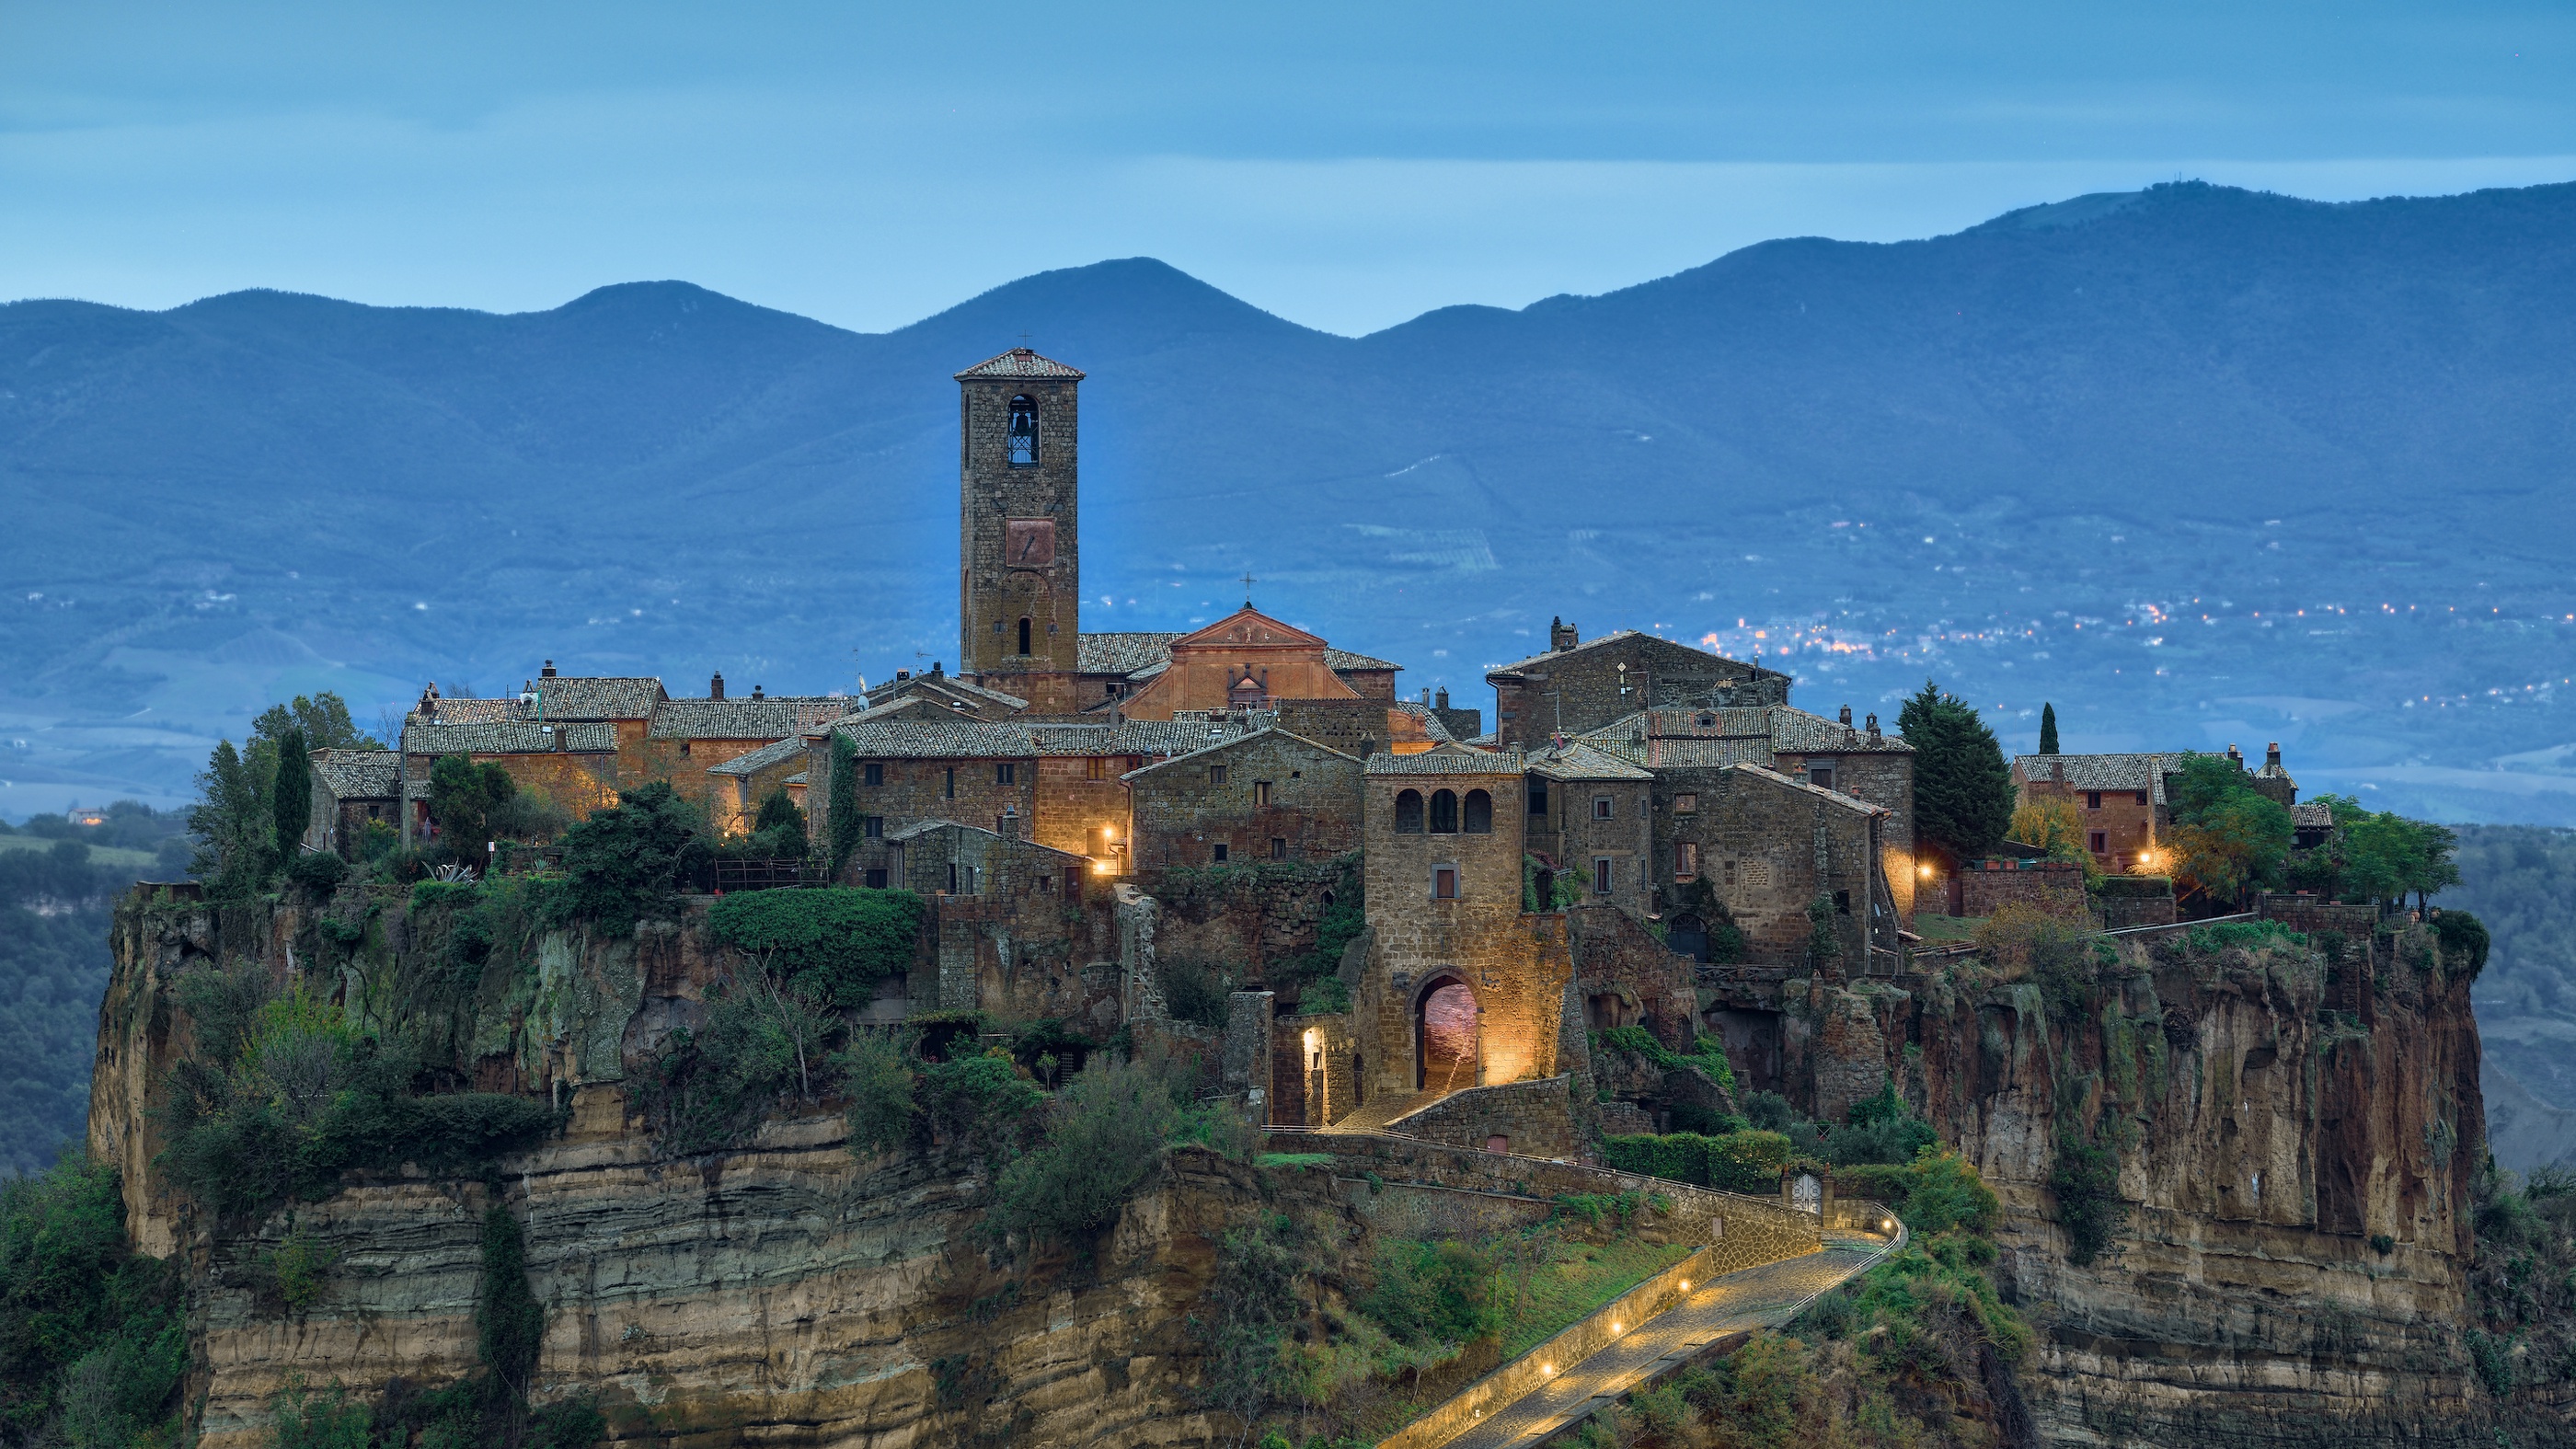 General 2800x1575 nature landscape architecture building old building village Italy rocks tower mountains lights road ancient